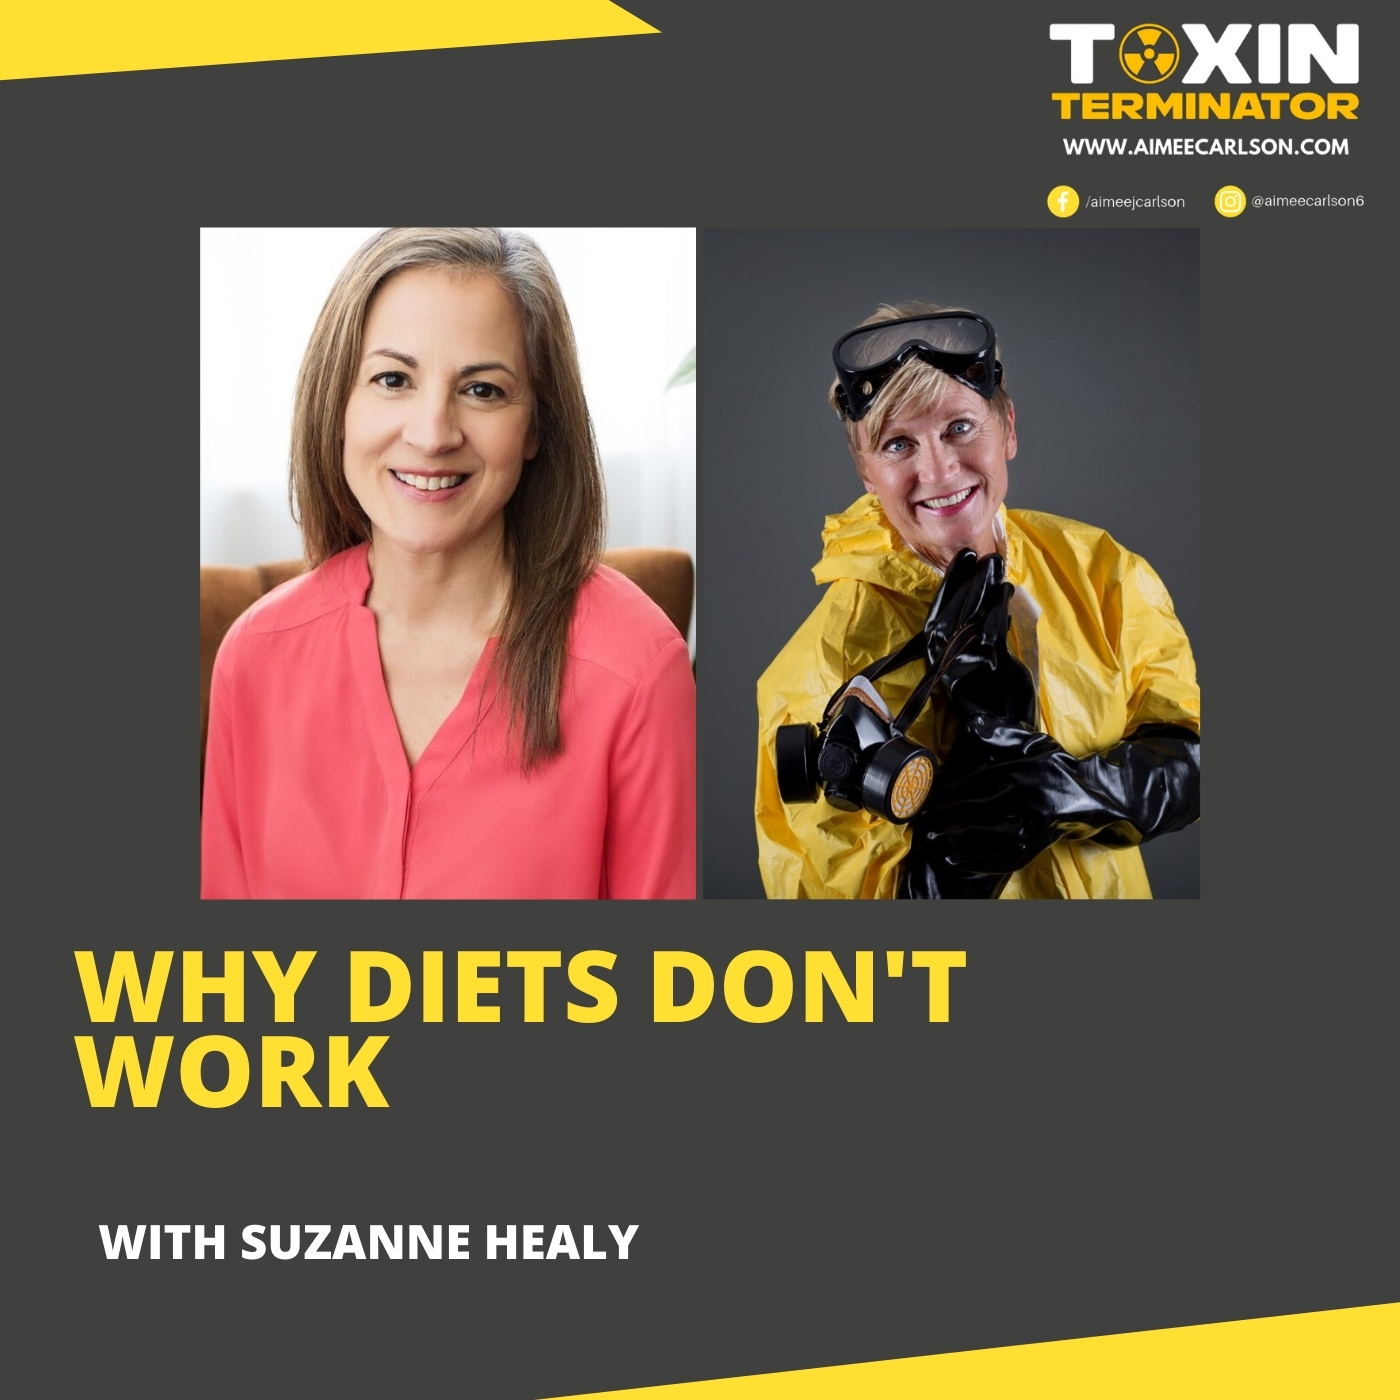 Why Diets Don't Work with Suzanne Healy